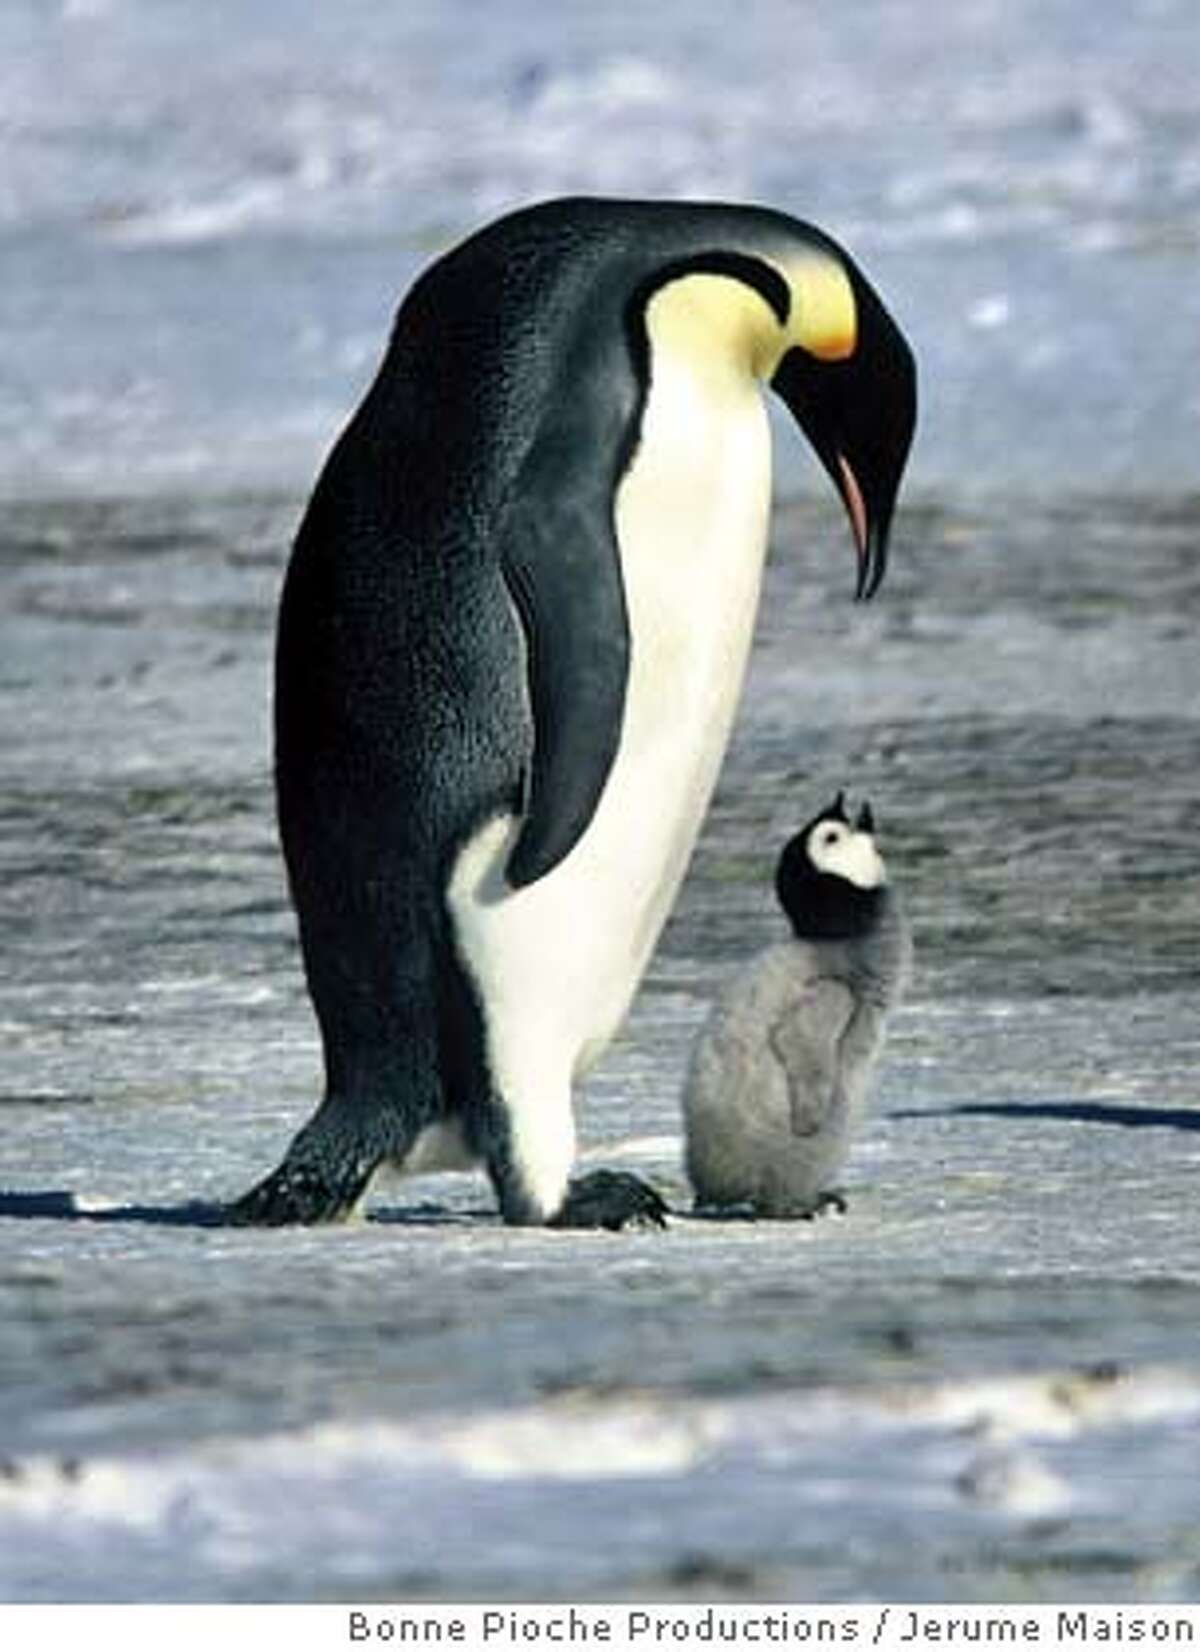 An Emperor penguin and its young are shown in a scene from the new documentary film "March of the Penguins" from Warner Independent Pictures in this undated publicity photograph. With box offices receipts down for the year and fans blaming boring remakes and sequels, three documentaries that are part of a new style of non-fiction films are winning rave reviews for turning real people -- and in one case, penguins -- into movie stars. "Murderball," "Rize," and "March of the Penguins" are more like Hollywood feature films, their makers and promoters say, structured with tension, conflict and resolution. To match feature Leisure-Documentaries REUTERS/J�r�me Maison/Bonne Pioche Productions/Alliance De Production Cin�matographique/Handout Ran on: 07-24-2005 Emperor penguins in March of the Penguins, which is giving the summer block- busters a run for the money. Ran on: 07-27-2005 Survivors: An emperor penguin and its offspring in a scene from March of the Penguins, a documentary that prompts comparisons to human society. 0